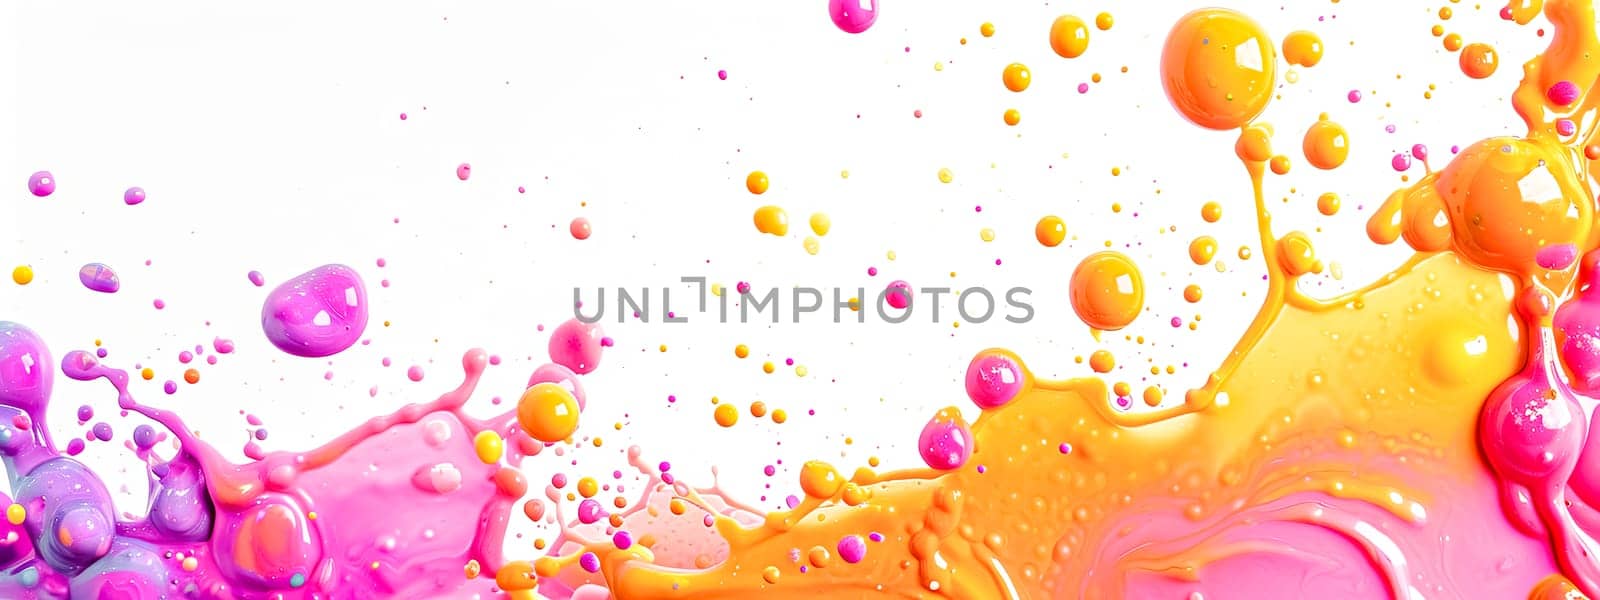 colored emulsion of pink and orange paint, creating a lively abstract composition. The vibrant droplets and swirling patterns of color evoke a sense of movement and energy